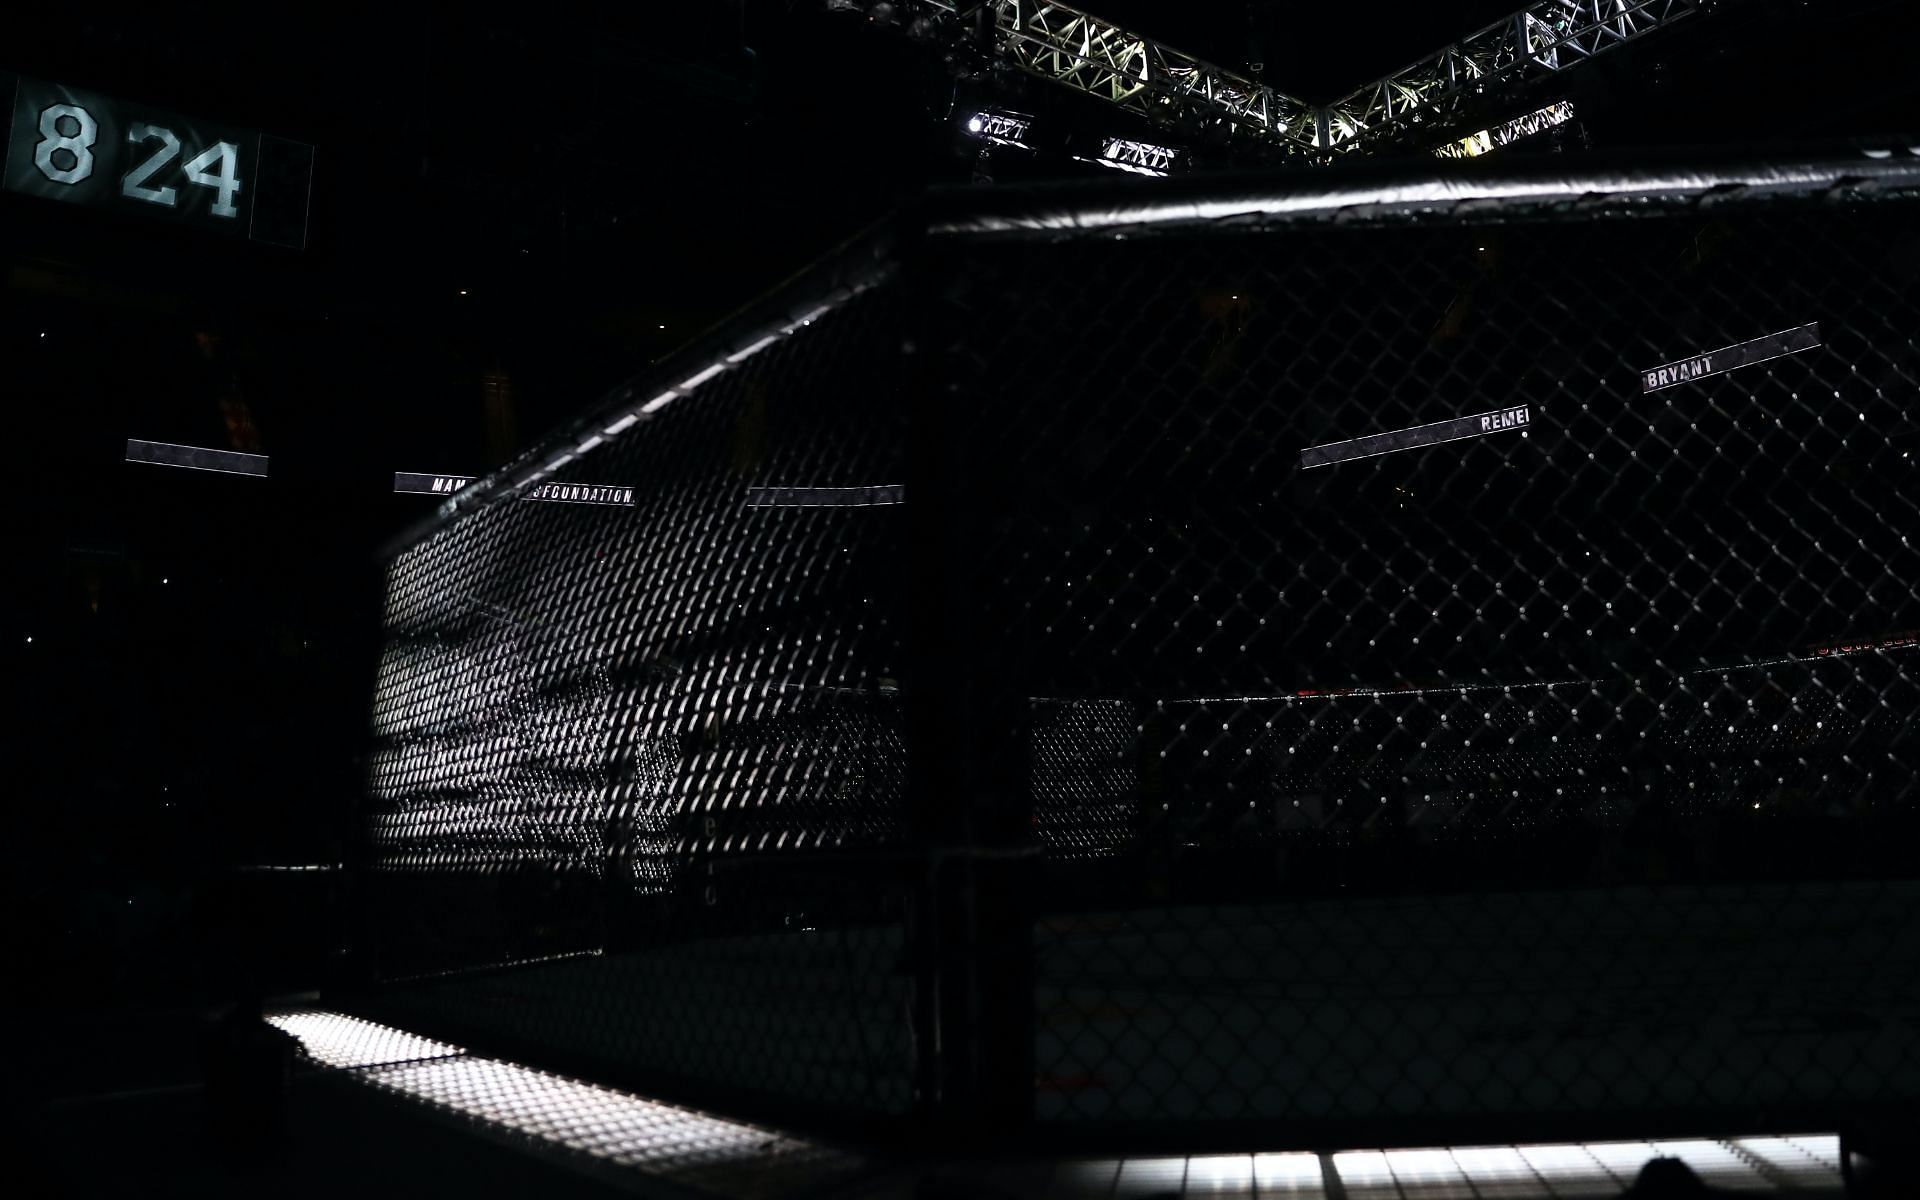 MMA referee suspended after pushing fighter [Image via: Getty Images]